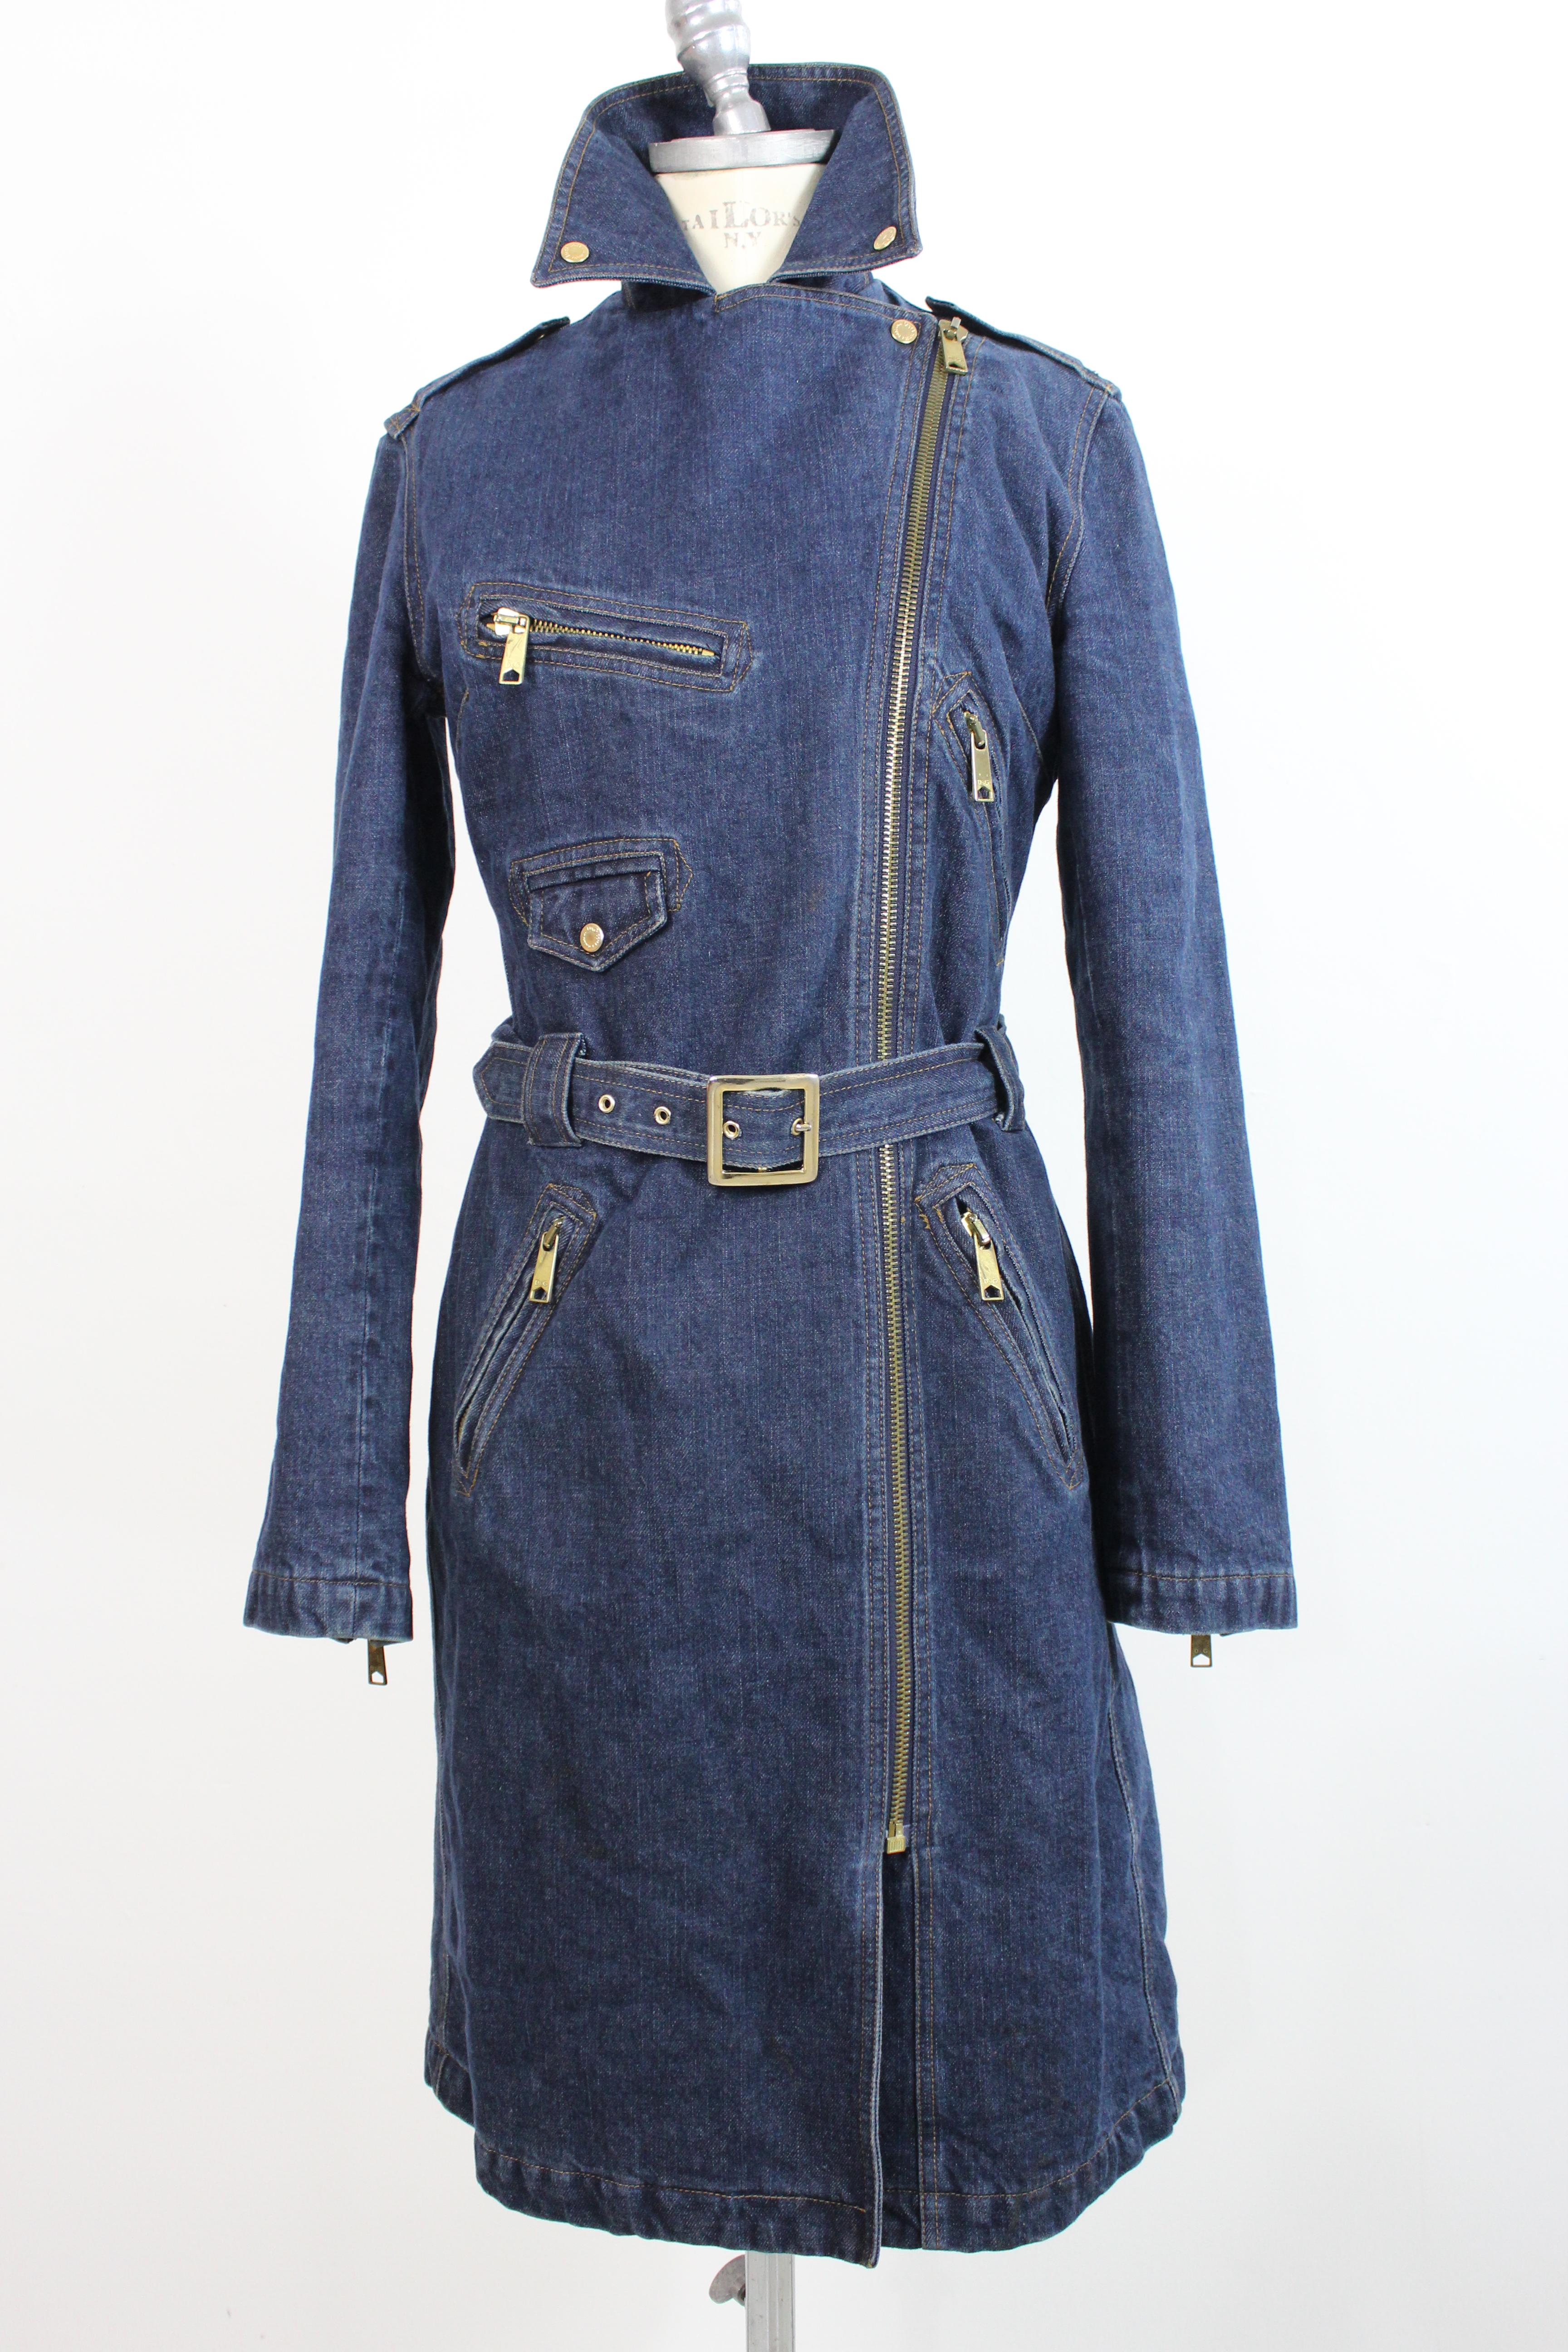 Vintage Dolce & Gabbana women's coat, blue jeans, 100% cotton. Long model trench type, double zipper closure, waist belt, chest and waist pockets. Gold-colored details. 90s. Made in Italy. Excellent vintage conditions.

Size: 42 It 8 Us 10